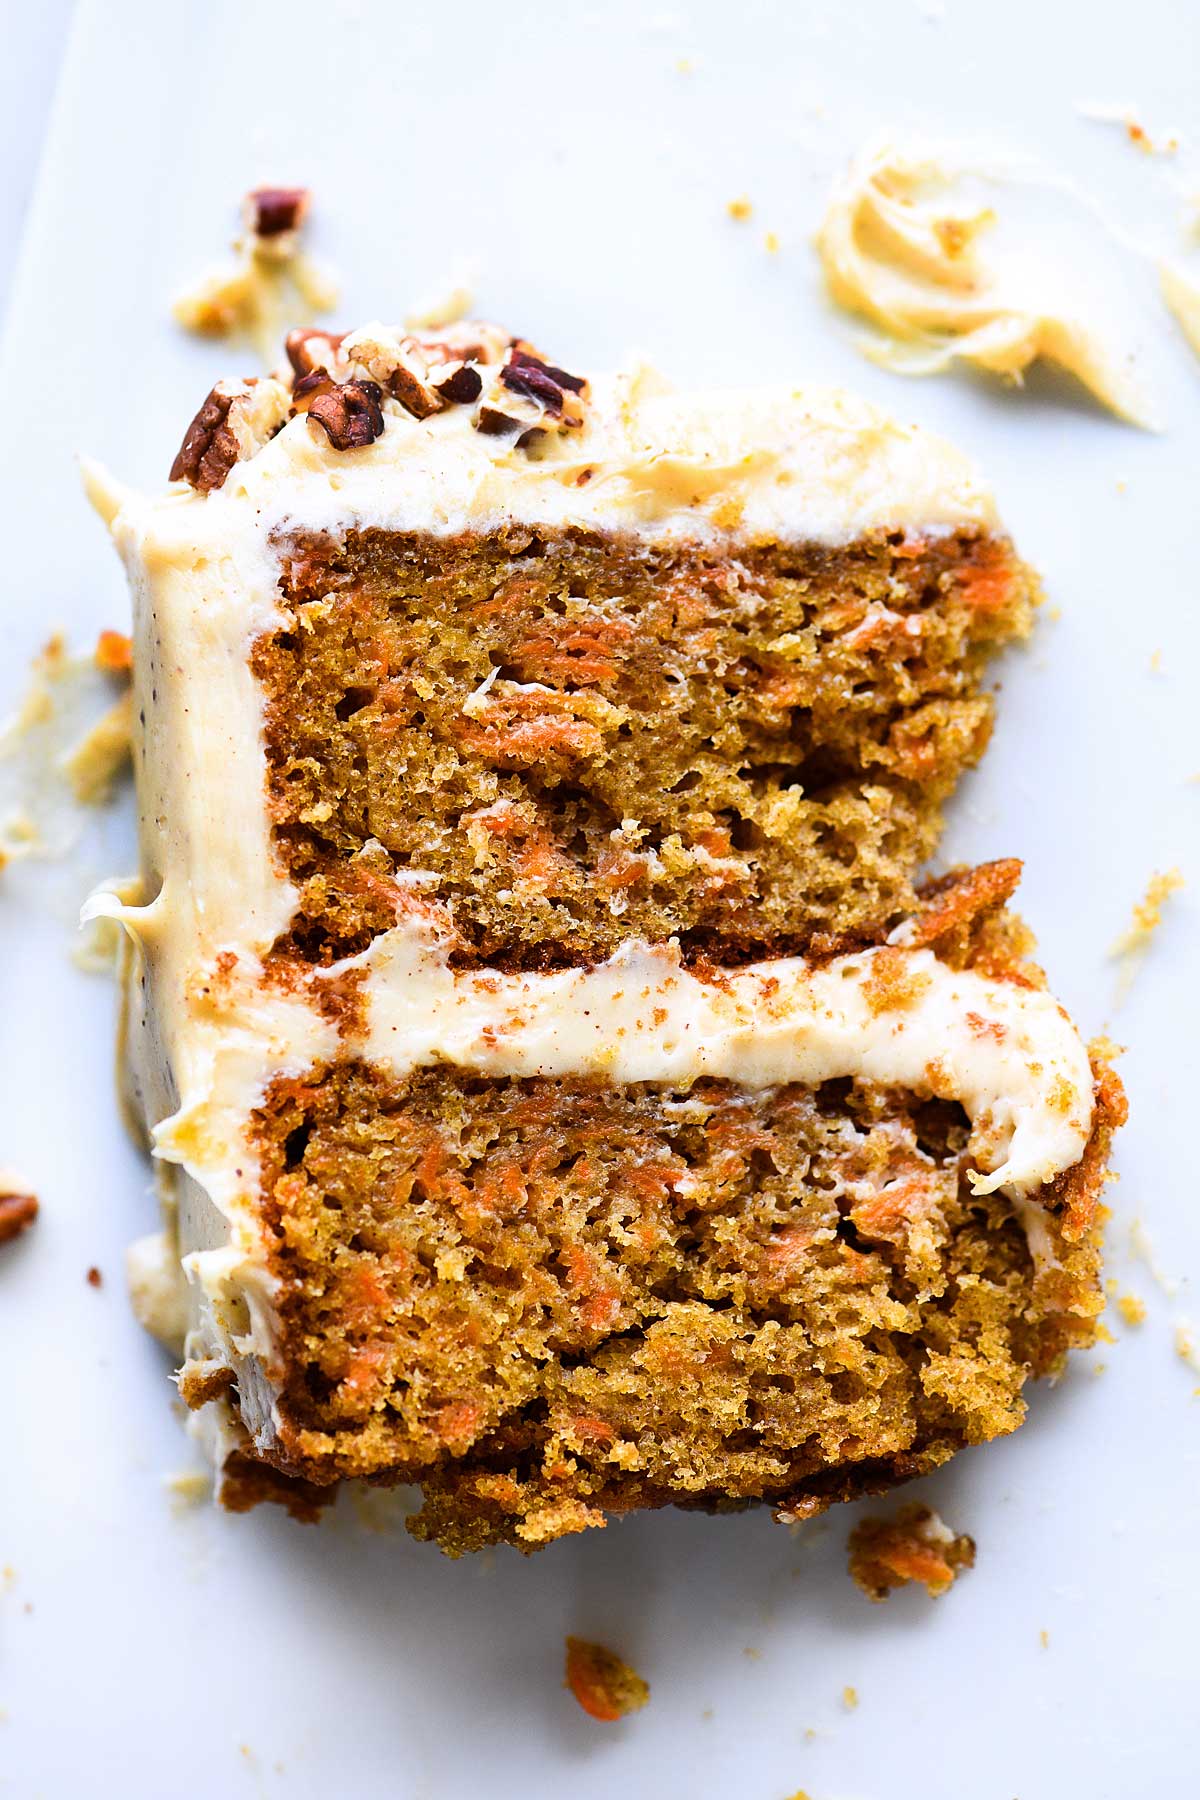 The Buttermilk Glaze Makes this Carrot Cake the Best You'll Ever Eat -  Family Savvy